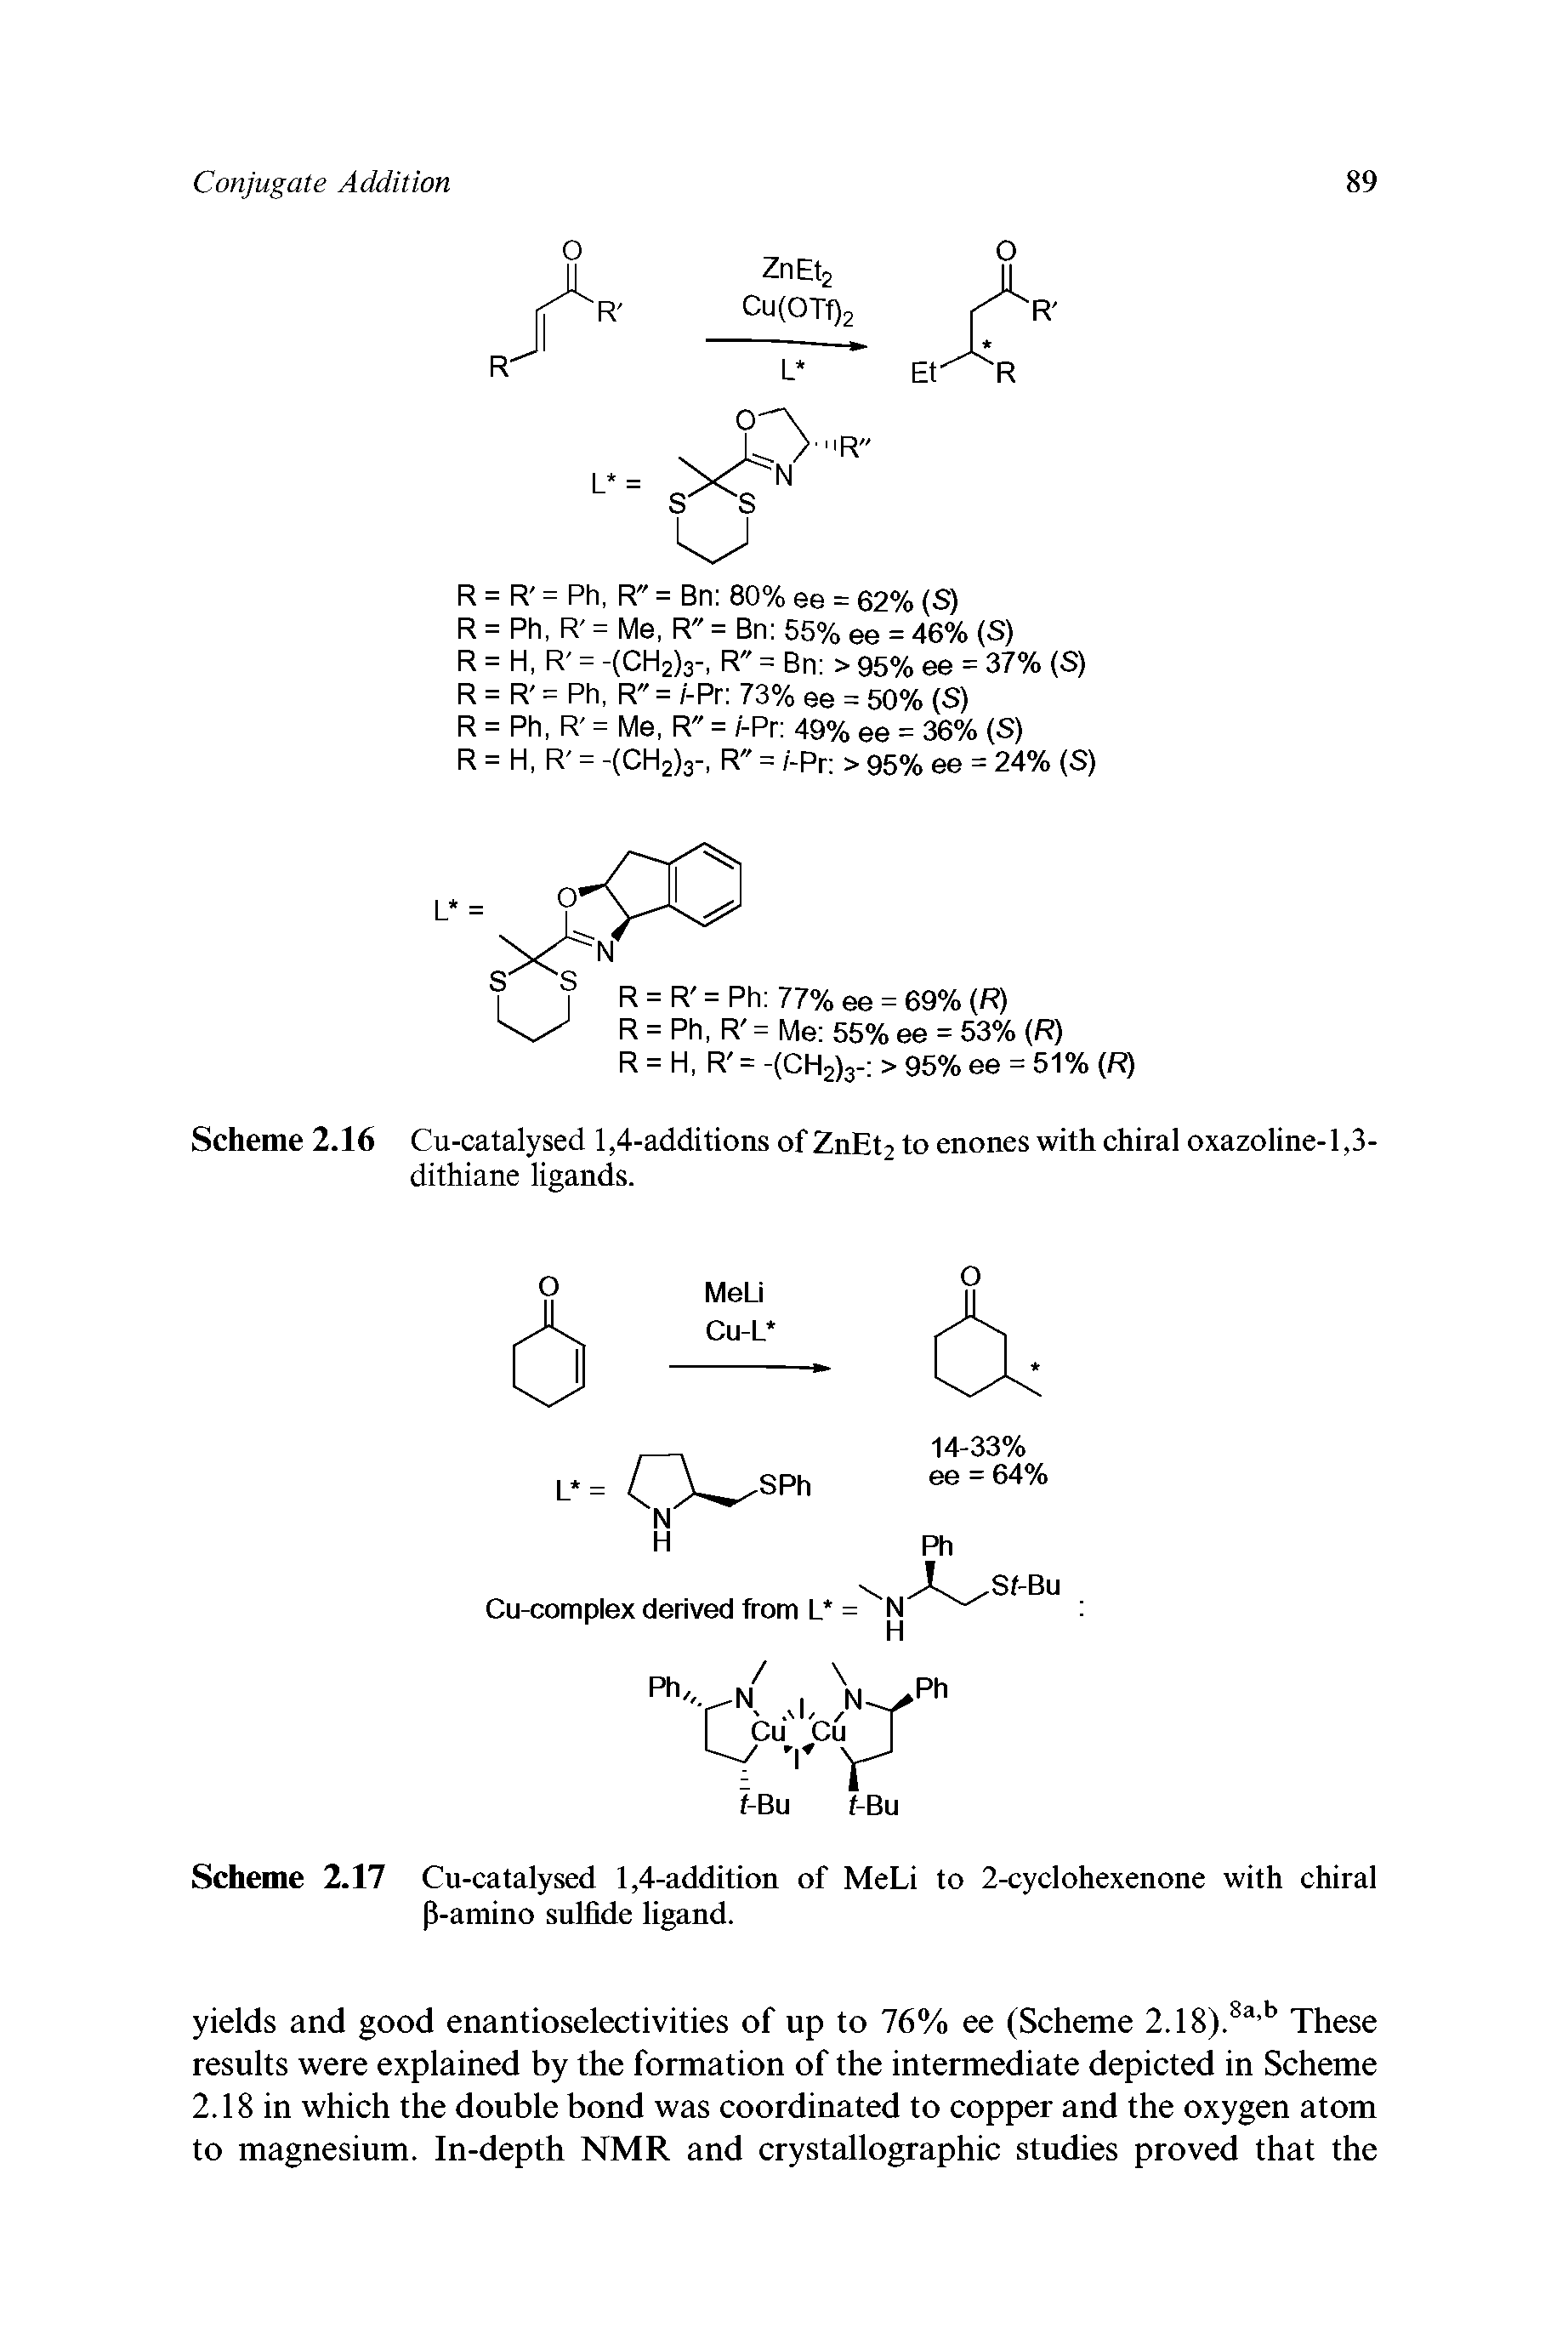 Scheme 2.16 Cu-catalysed 1,4-additions of ZnEt2 to enones with chiral oxazoline-1,3-dithiane ligands.